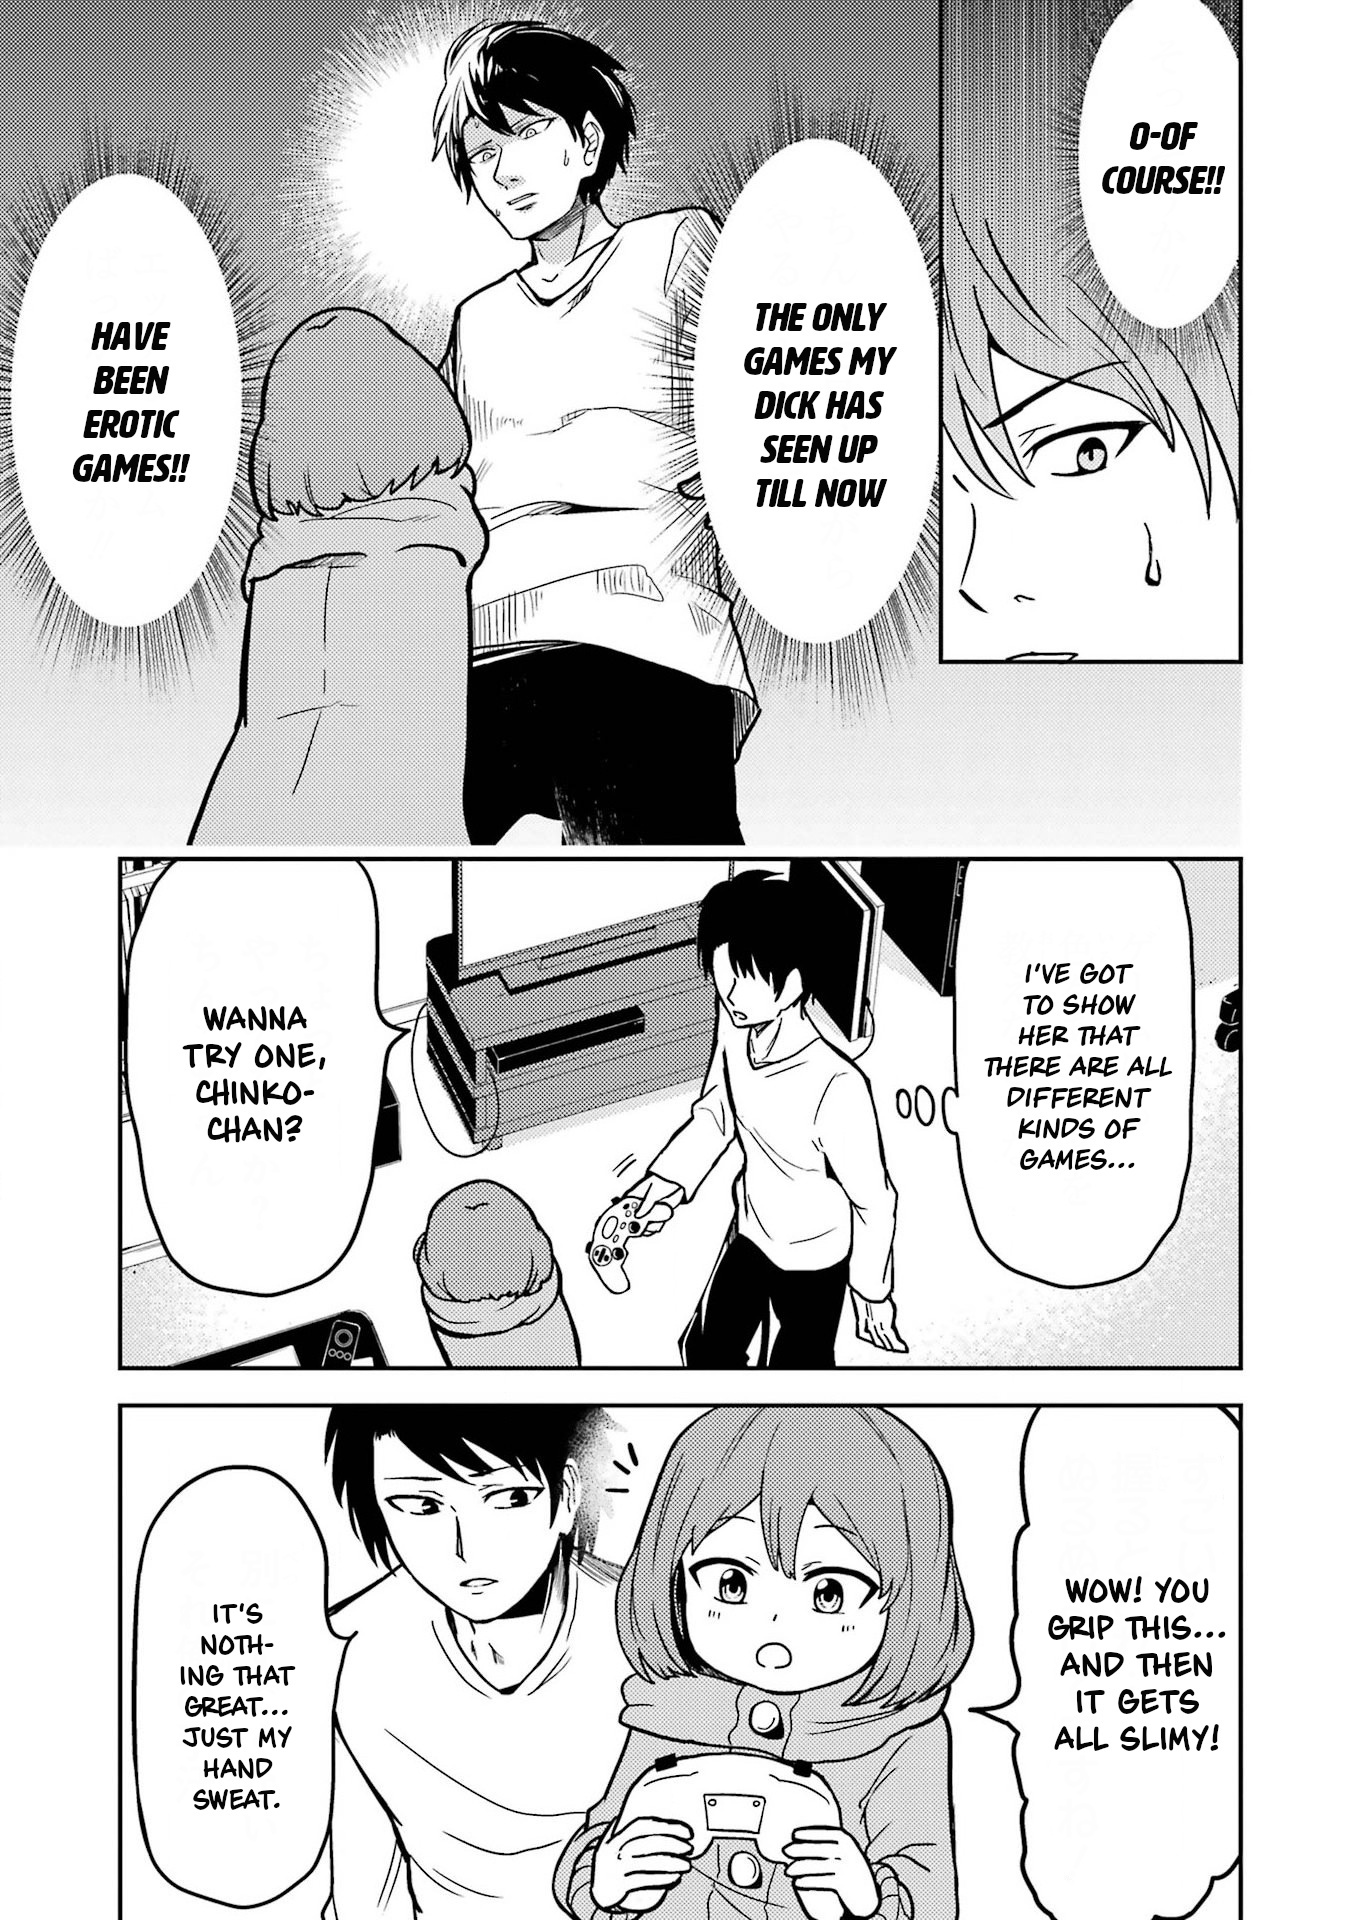 Turns Out My Dick Was A Cute Girl Vol.1 Chapter 8: The Dick Plays Games. - Picture 3